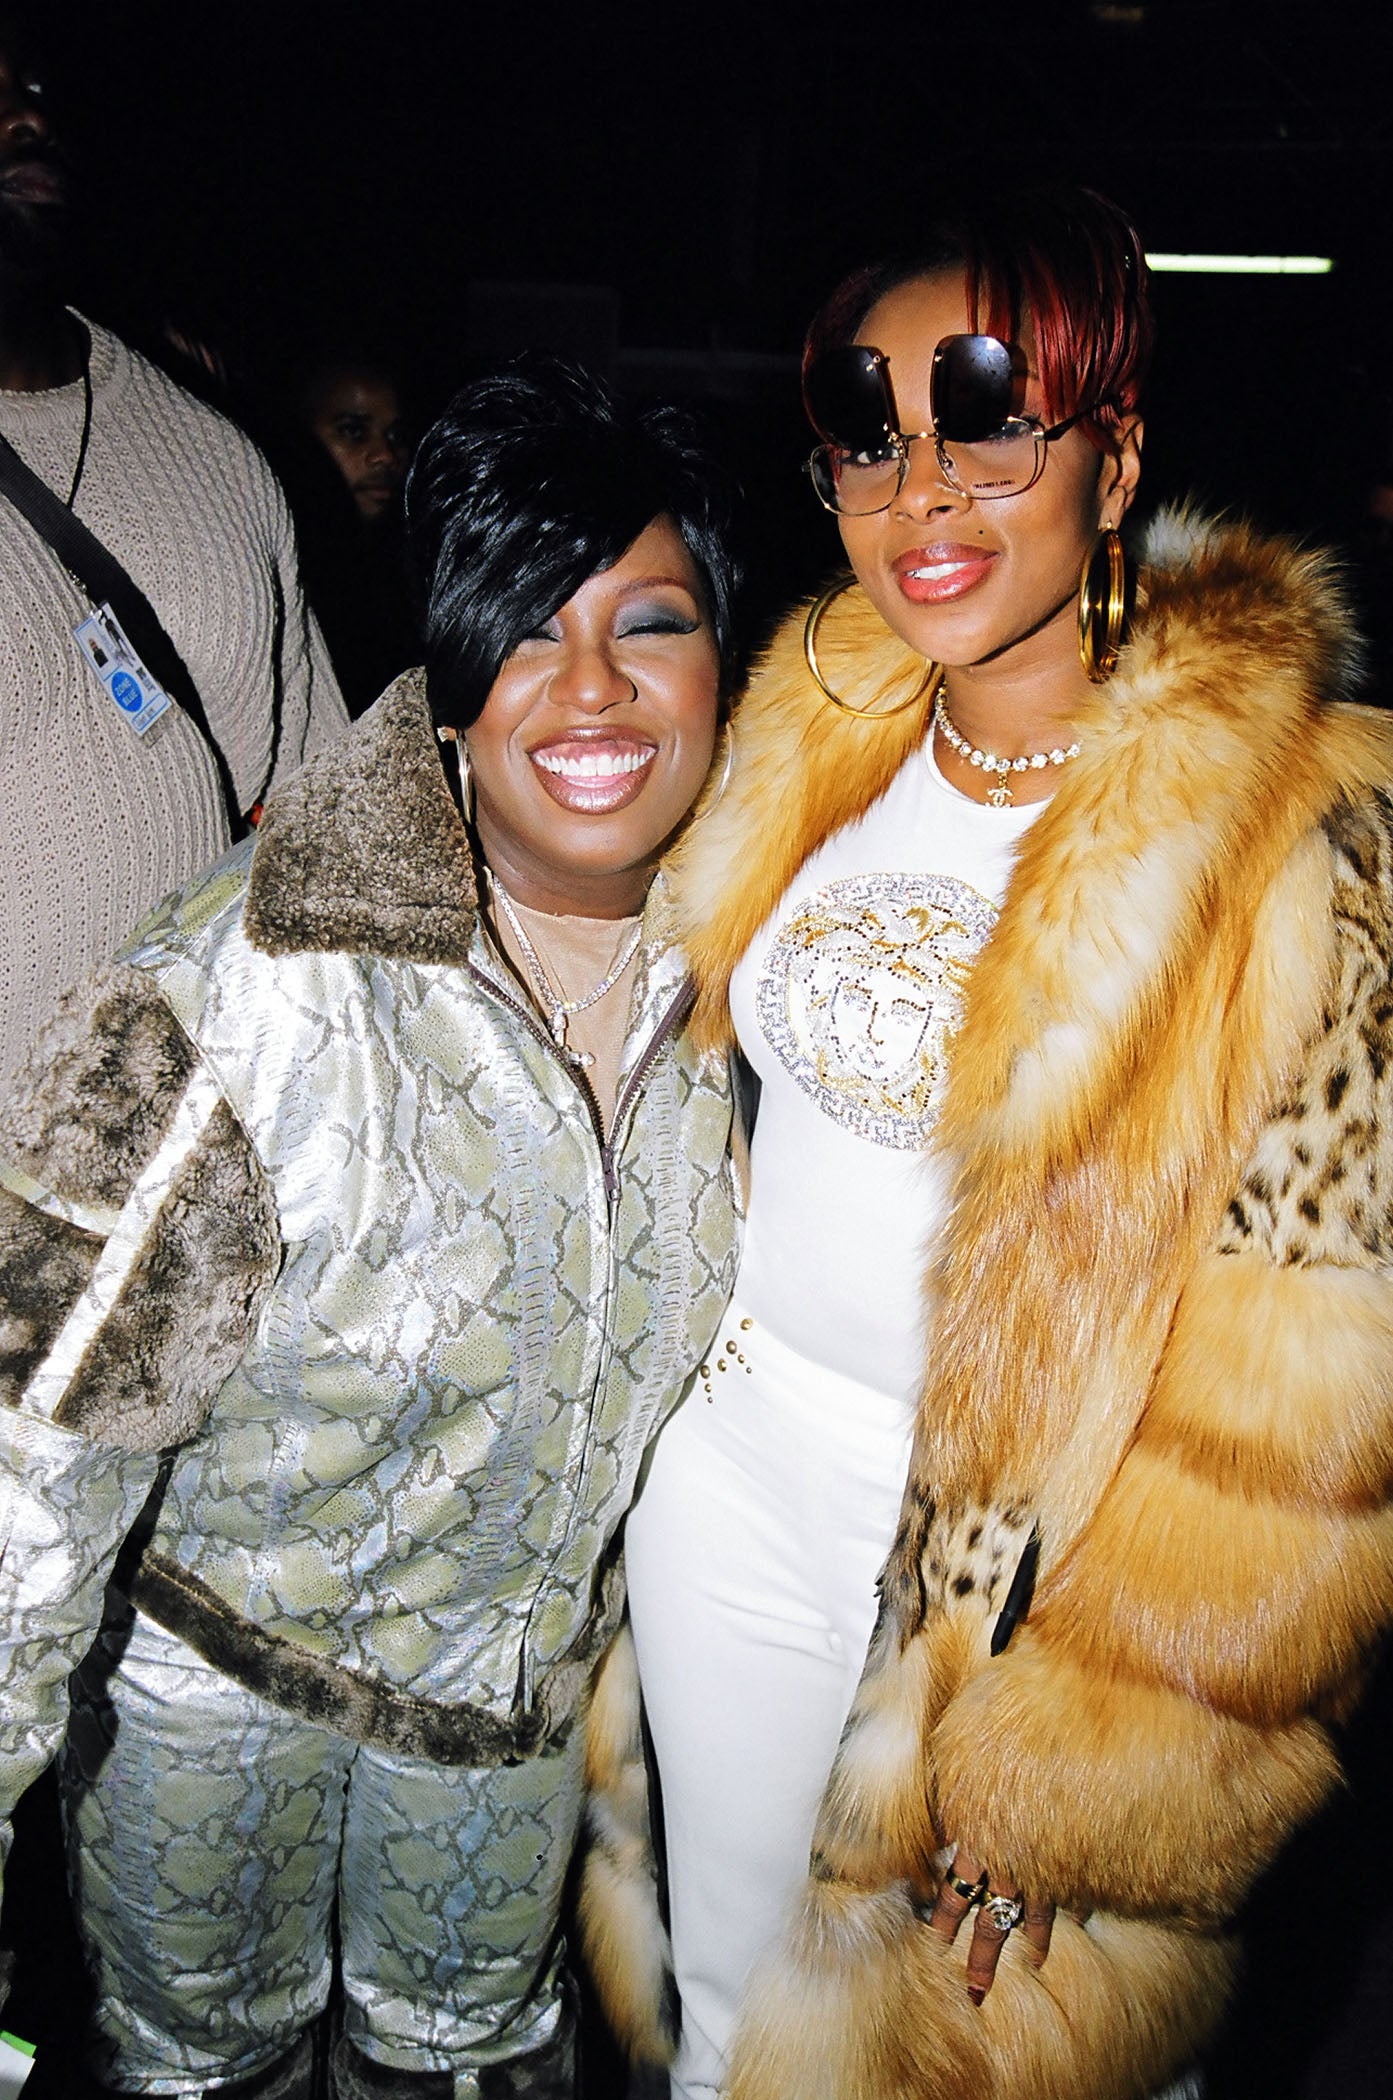 A Look Back At Mary J. Blige’s Most Iconic Beauty Moments